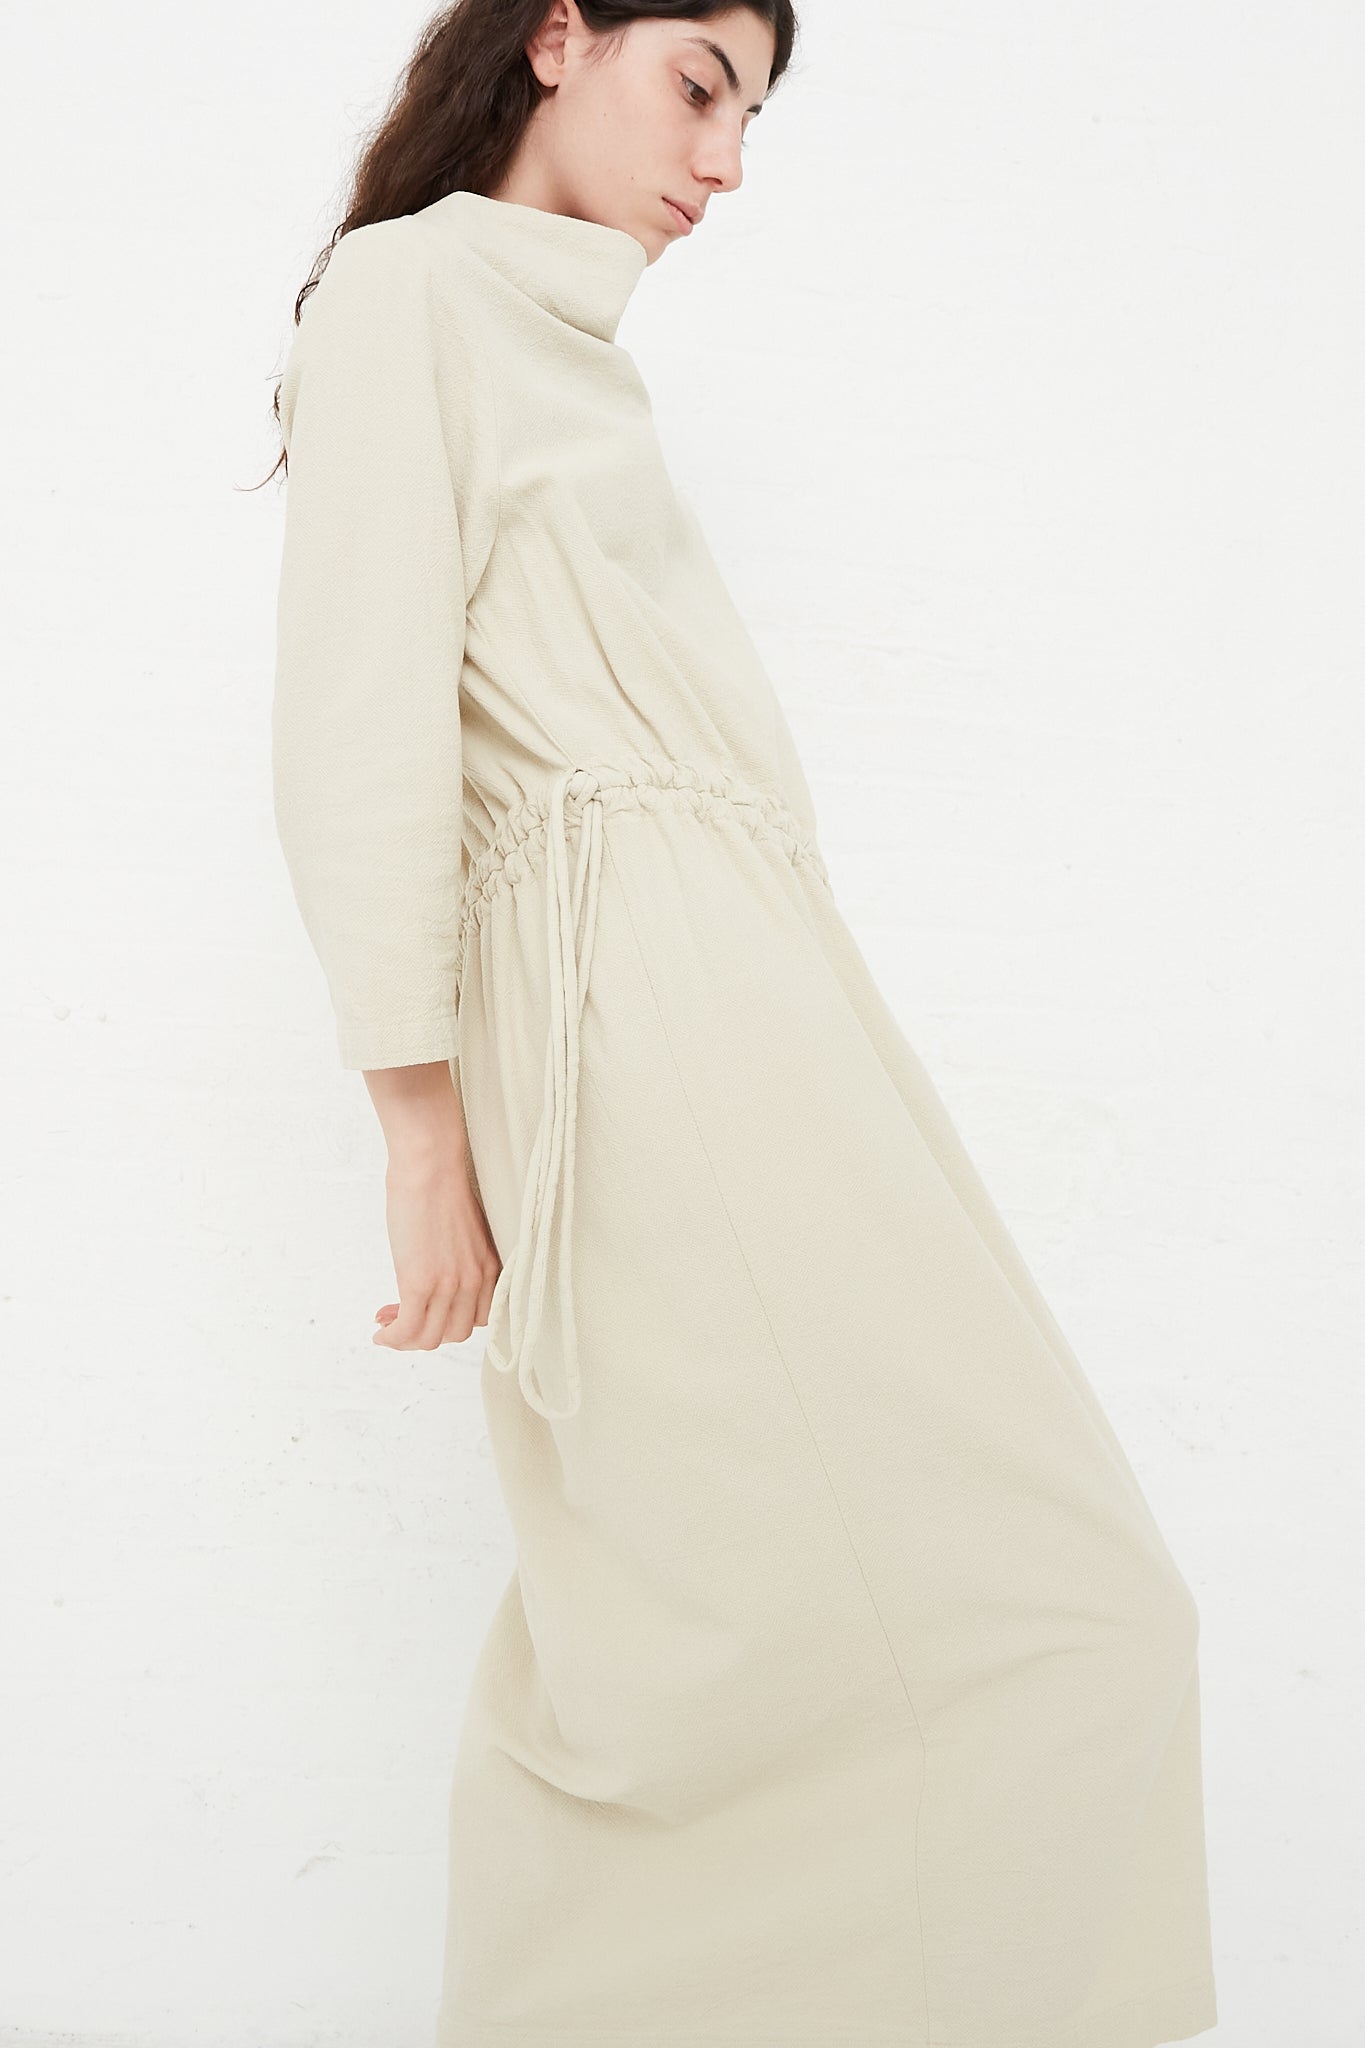 Cotton Woven Ruched Dress in Ivory by Black Crane for Oroboro Side